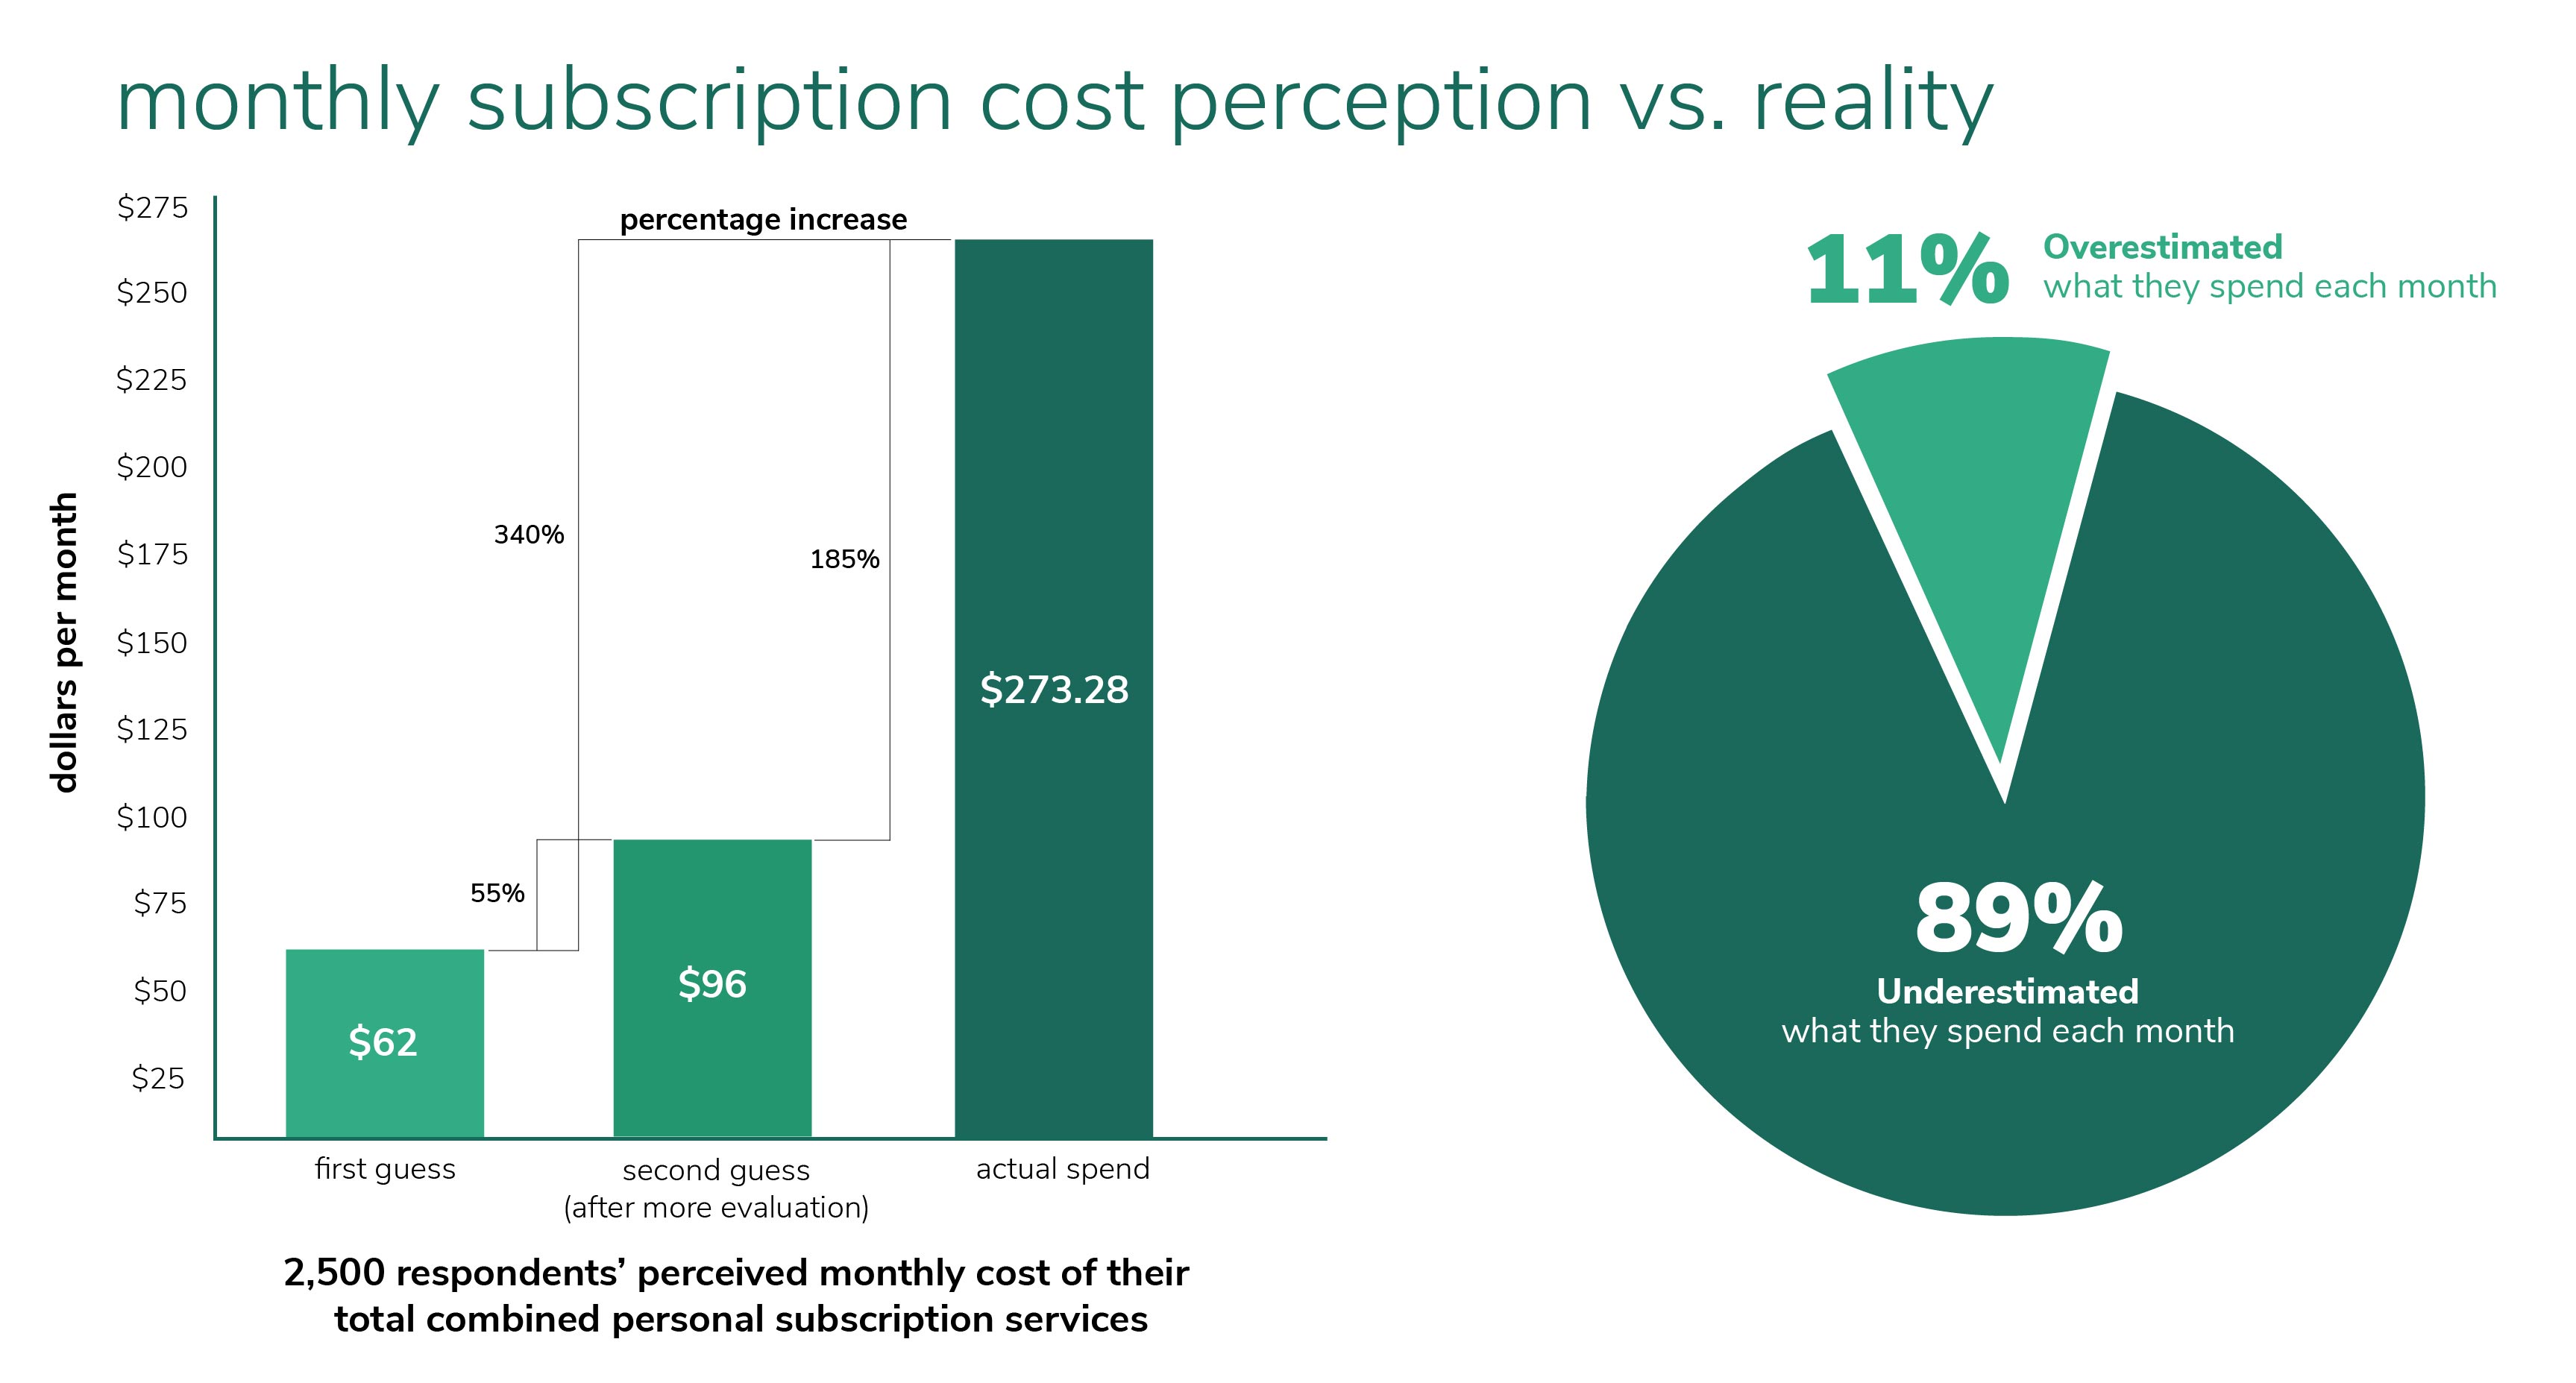 Monthly subscription cost perception vs. reality